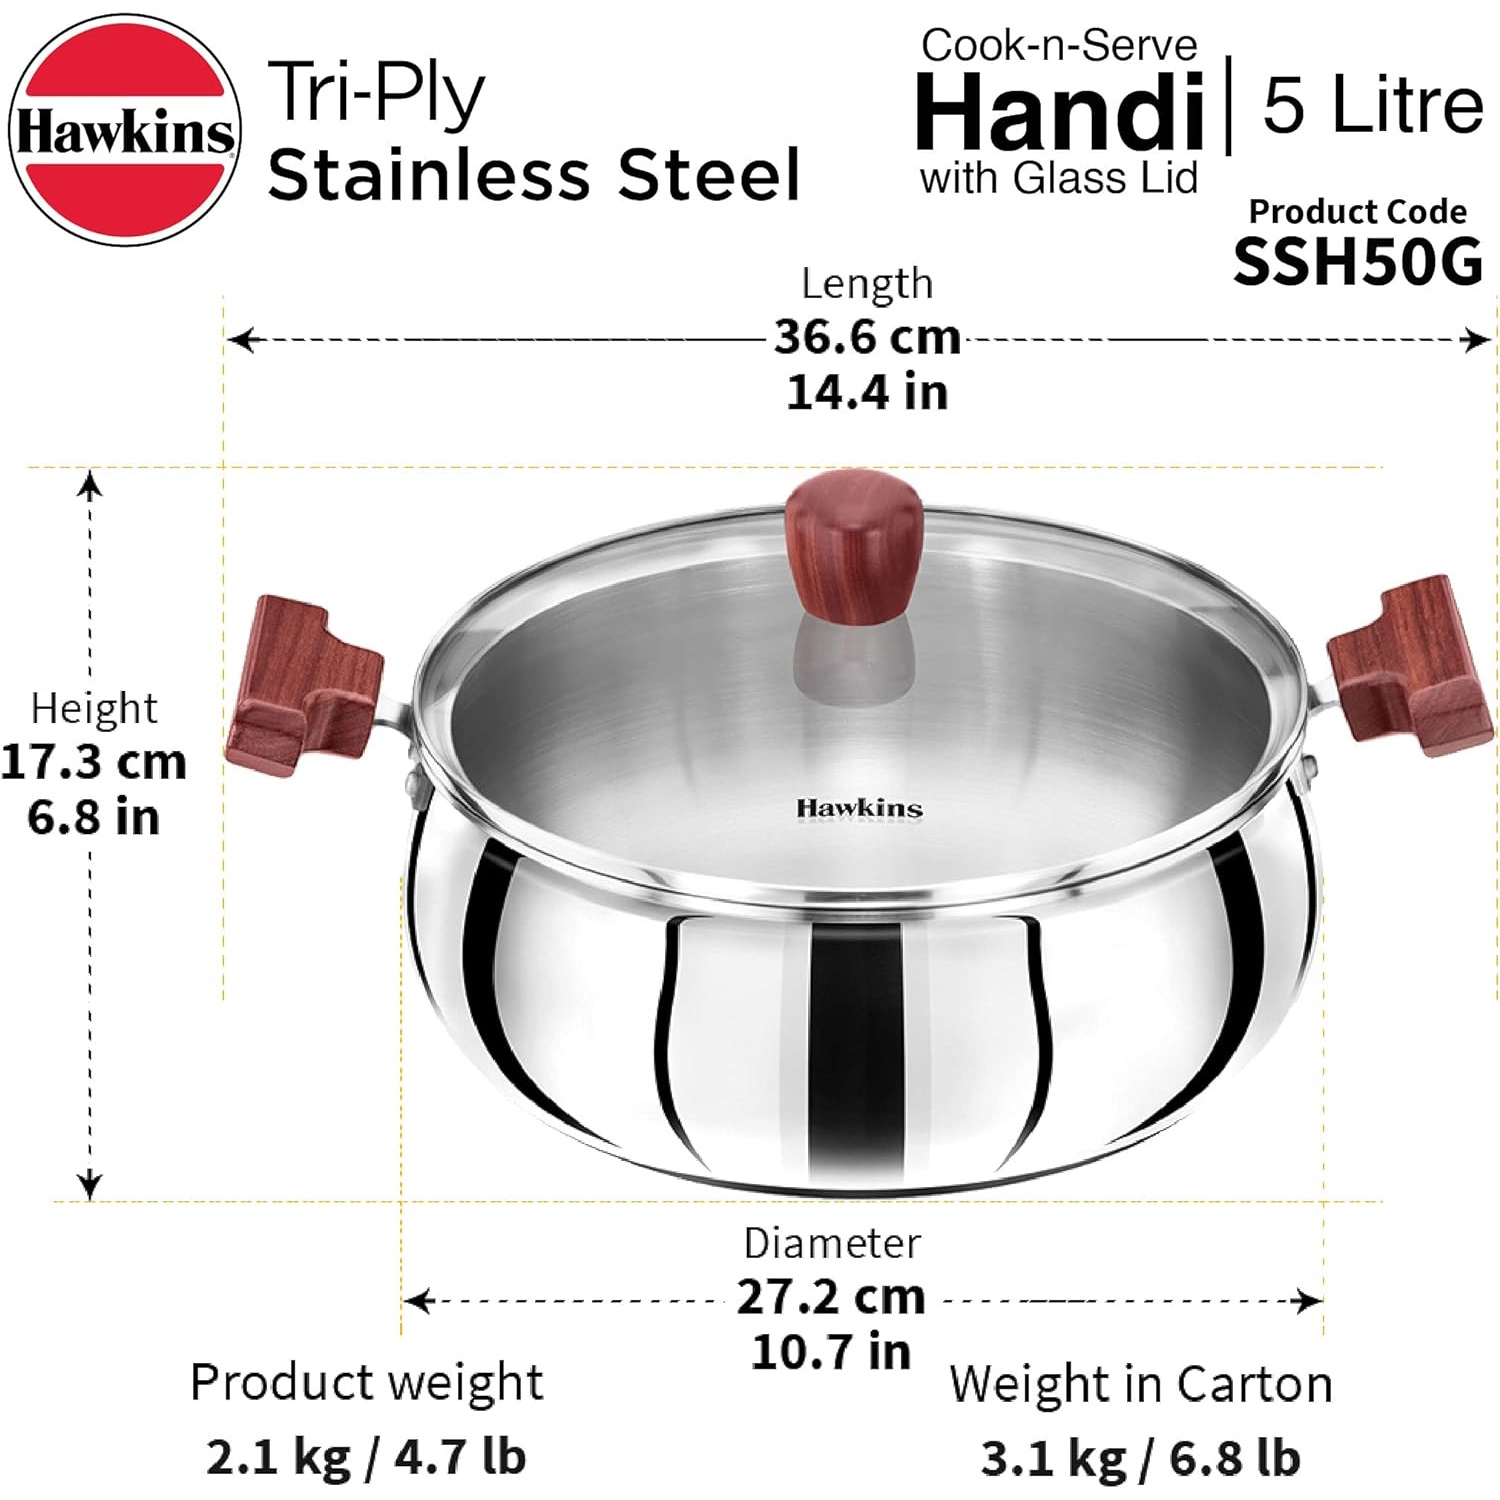 Hawkins Tri-ply Stainless Steel Handi 5 Litre With Glass Lid (SSH50G)